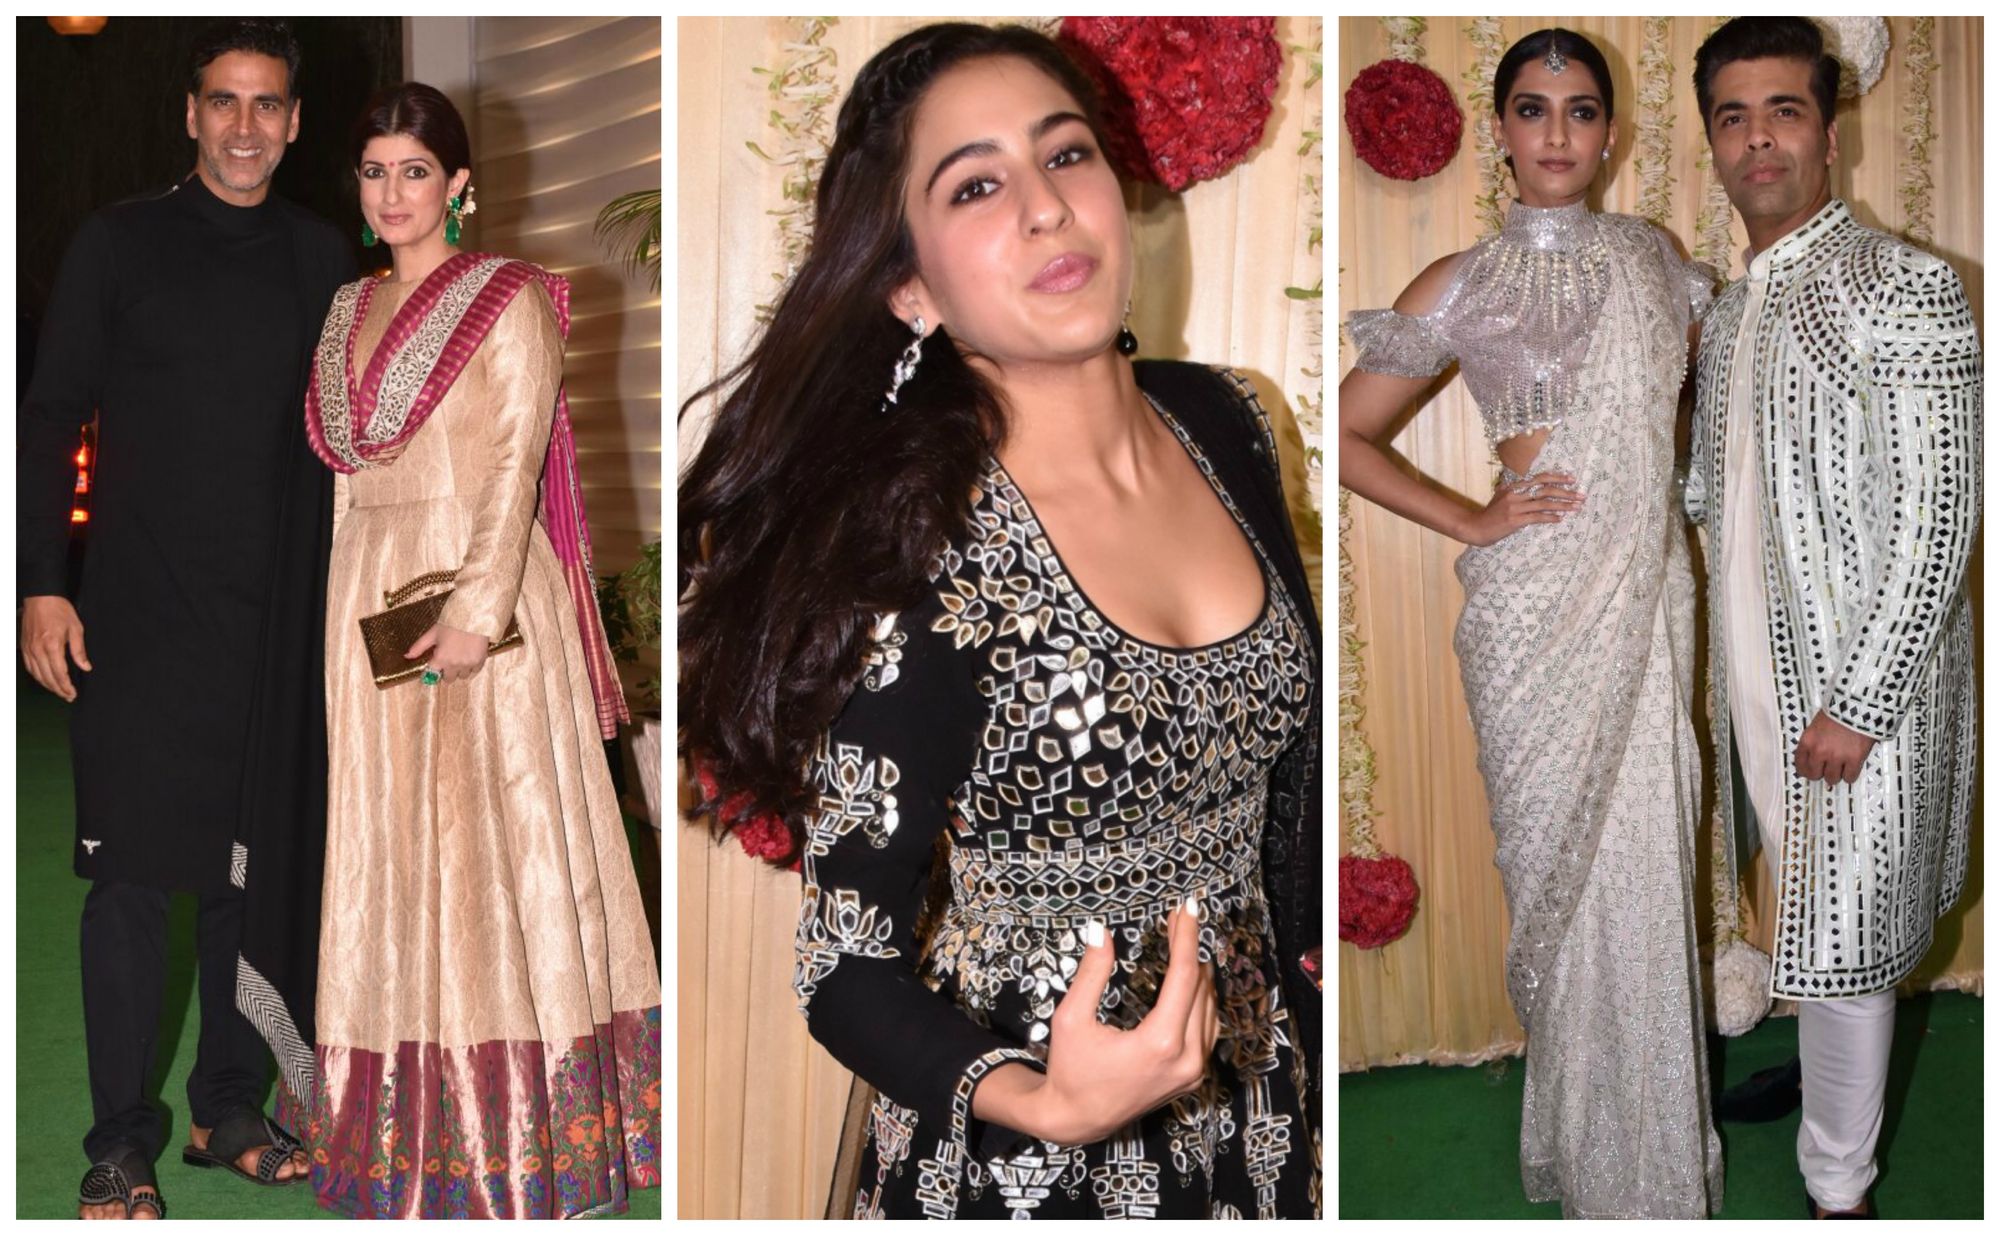 45 Photos You Need To See From Ekta Kapoor’s Star-Studded Diwali Party